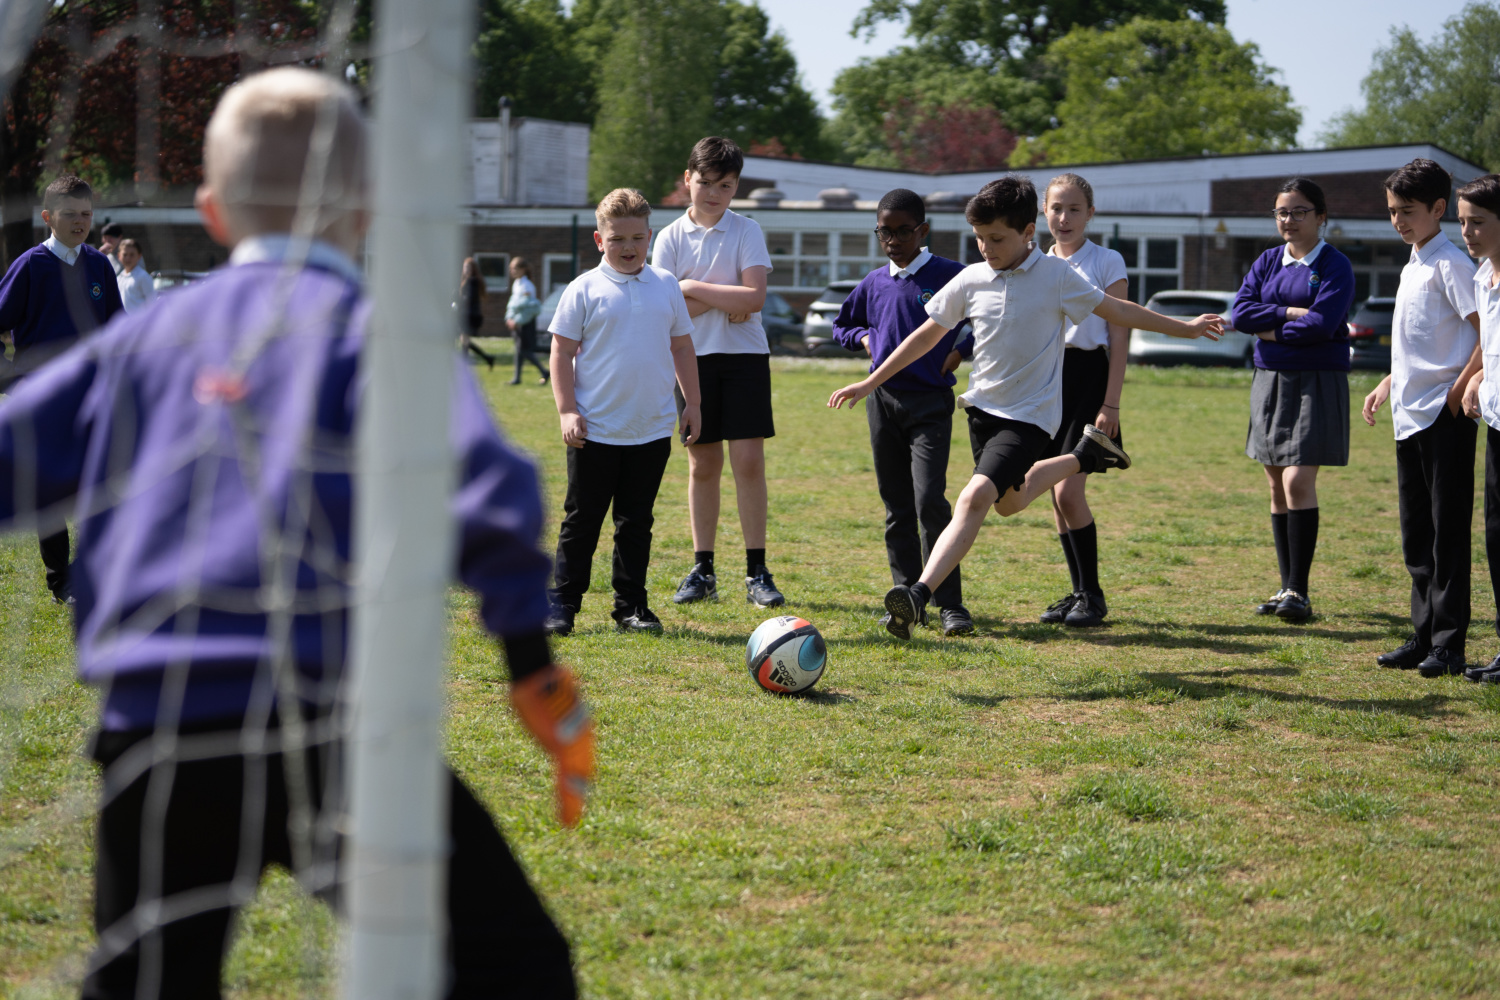 A group of Tree Tops pupils are seen playing a game of Football with one another. A boy is pictured about to take a shot. In the foreground the goalie can be seen about to block the ball.